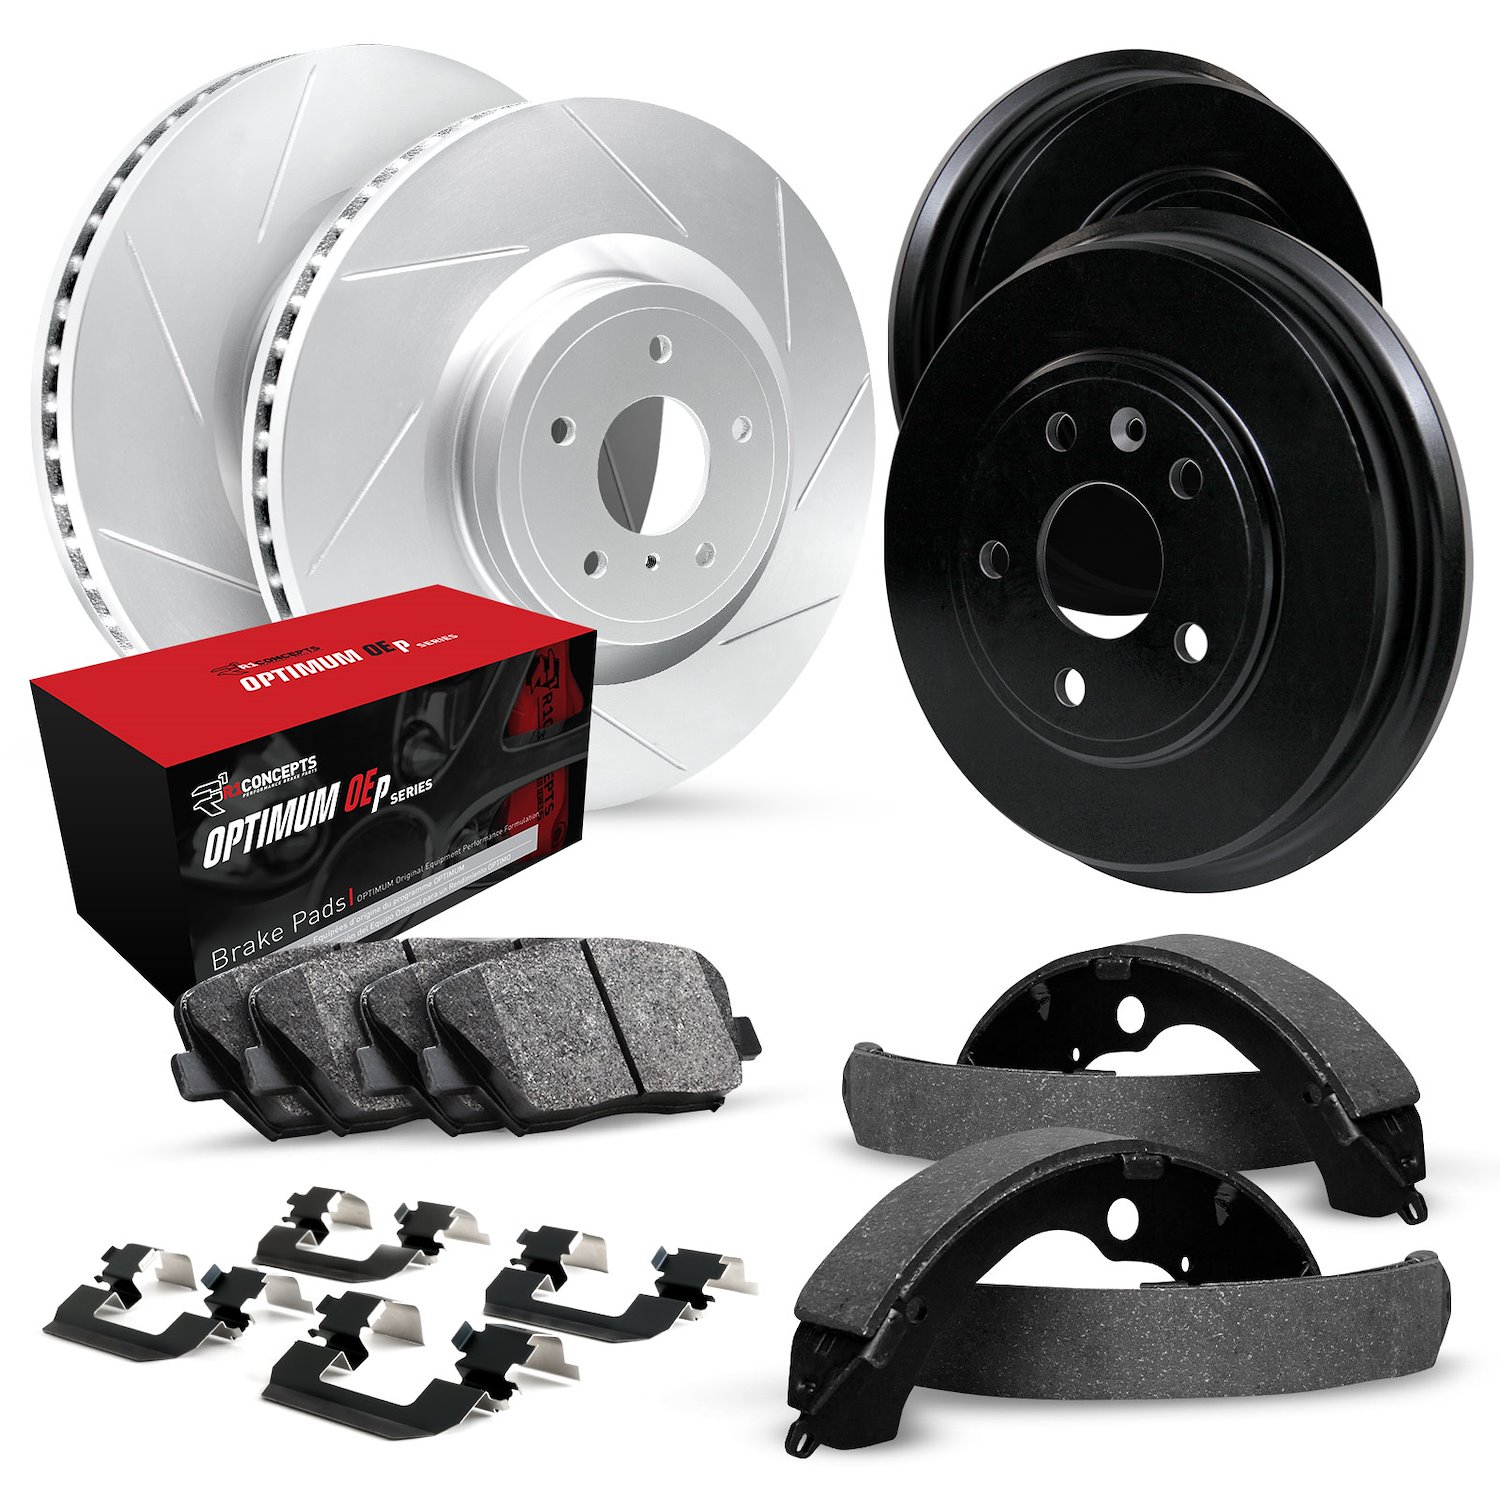 GEO-Carbon Slotted Brake Rotor & Drum Set w/Optimum OE Pads, Shoes, & Hardware, 1998-2002 Ford/Lincoln/Mercury/Mazda